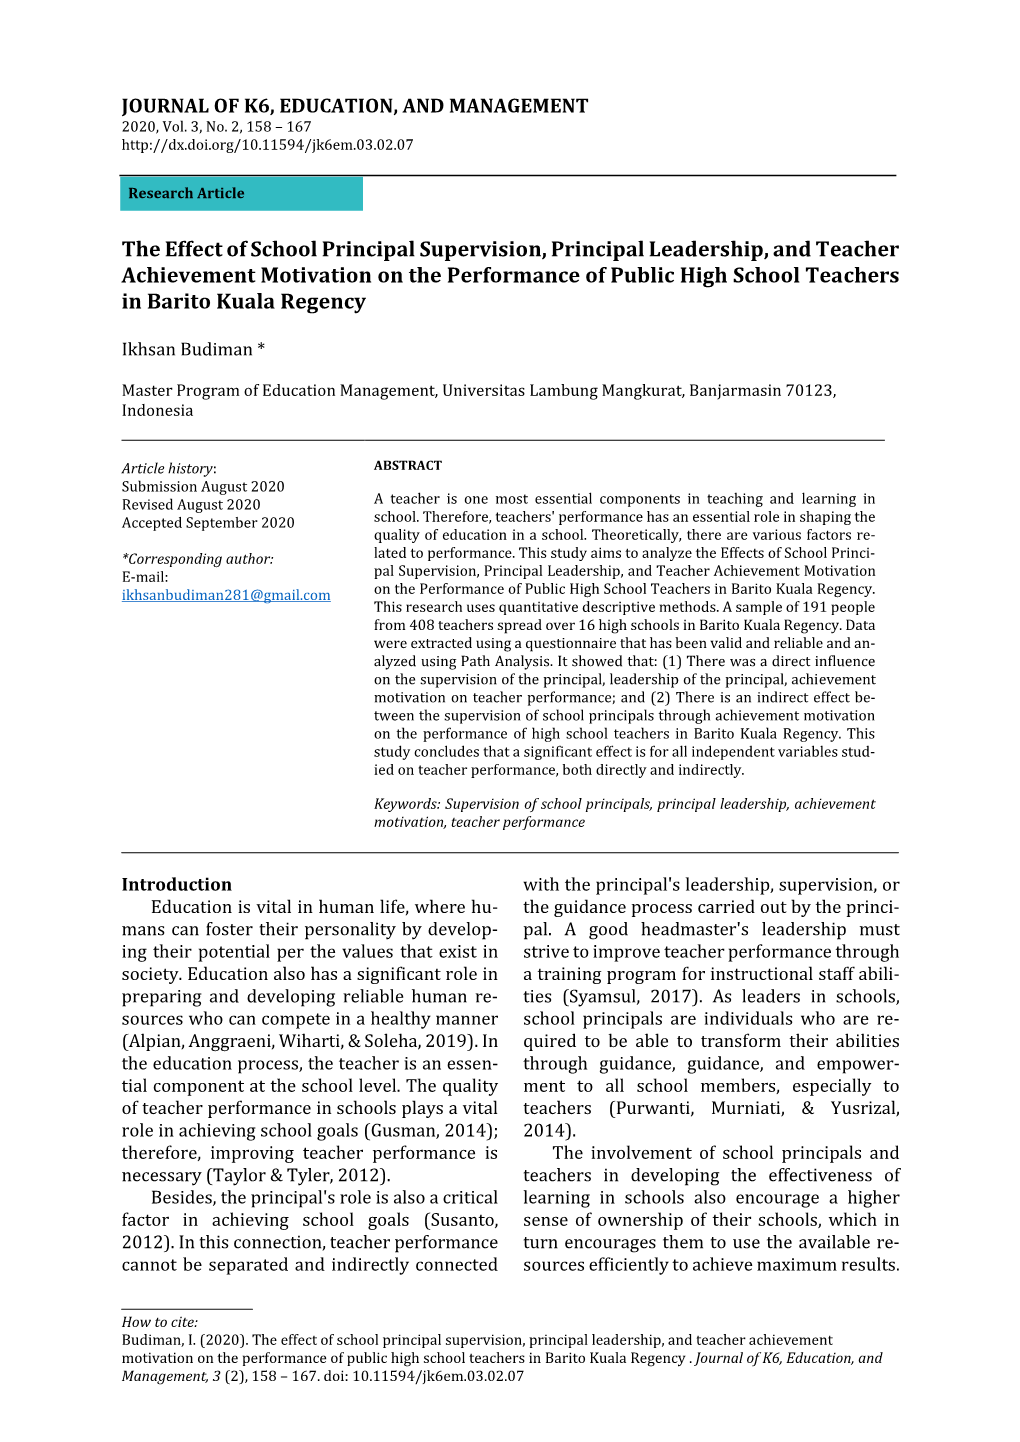 The Effect of School Principal Supervision, Principal Leadership, and Teacher Achievement Motivation on the Performance of Publi